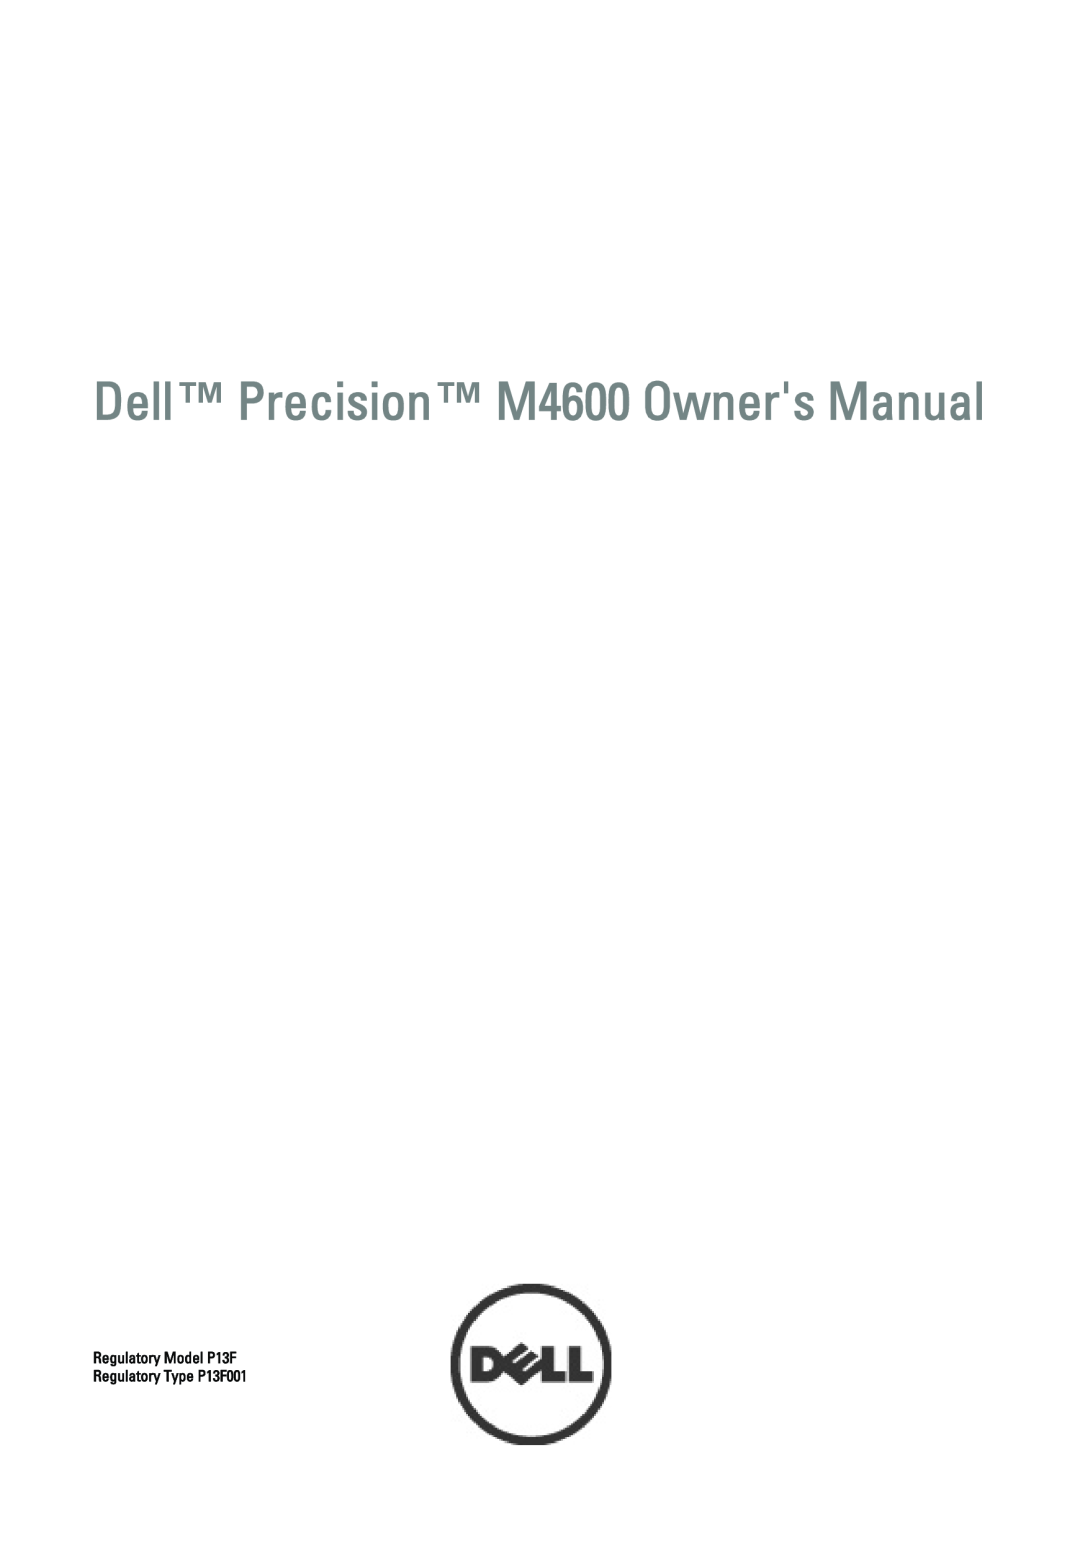 Dell manual M4600 - Front And Back View, Dell Precision M4600/M6600 Mobile Workstation, Setup And Features Information 